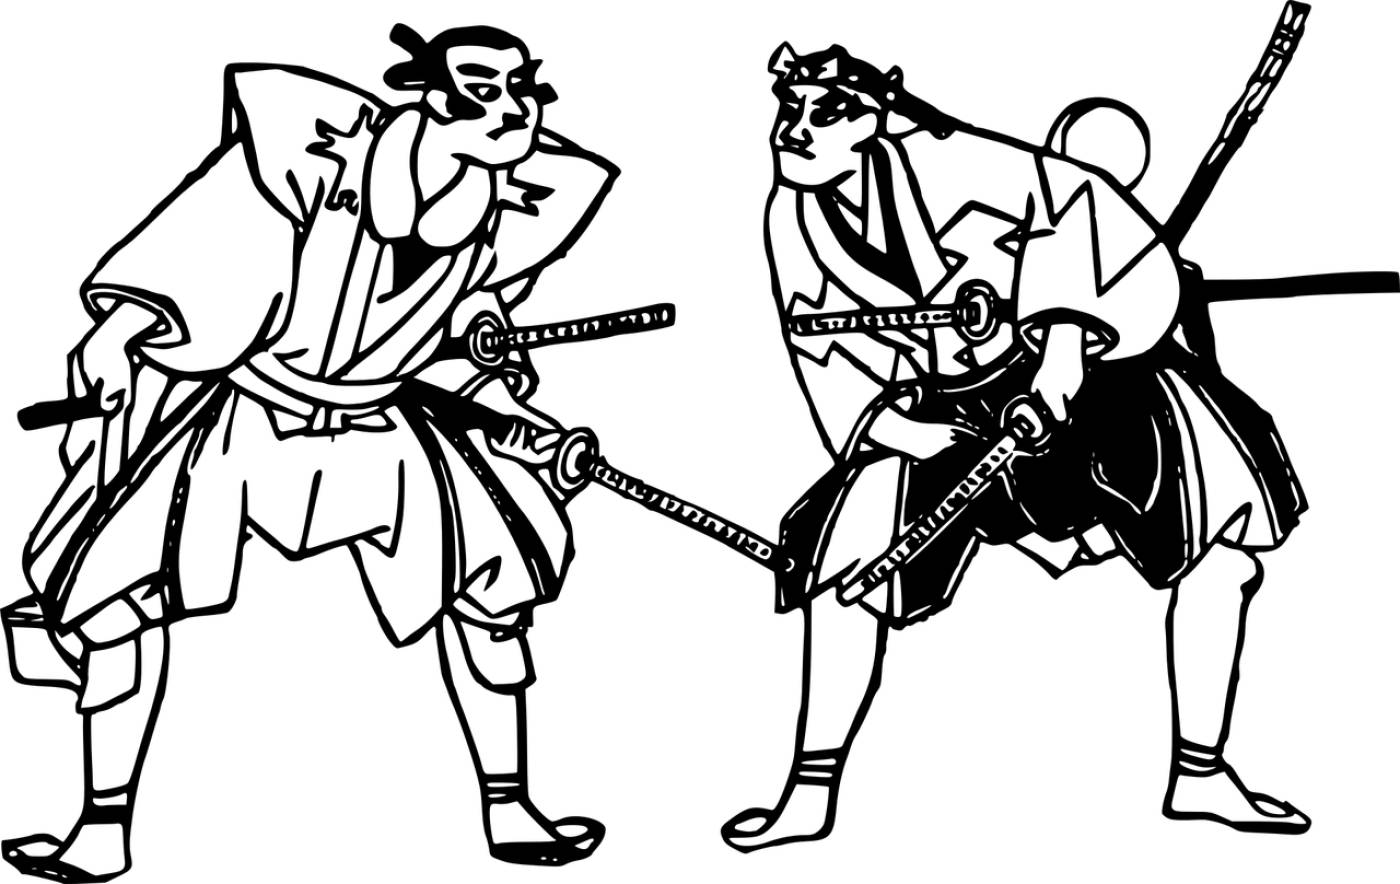 angry culture fight history japan  svg vector